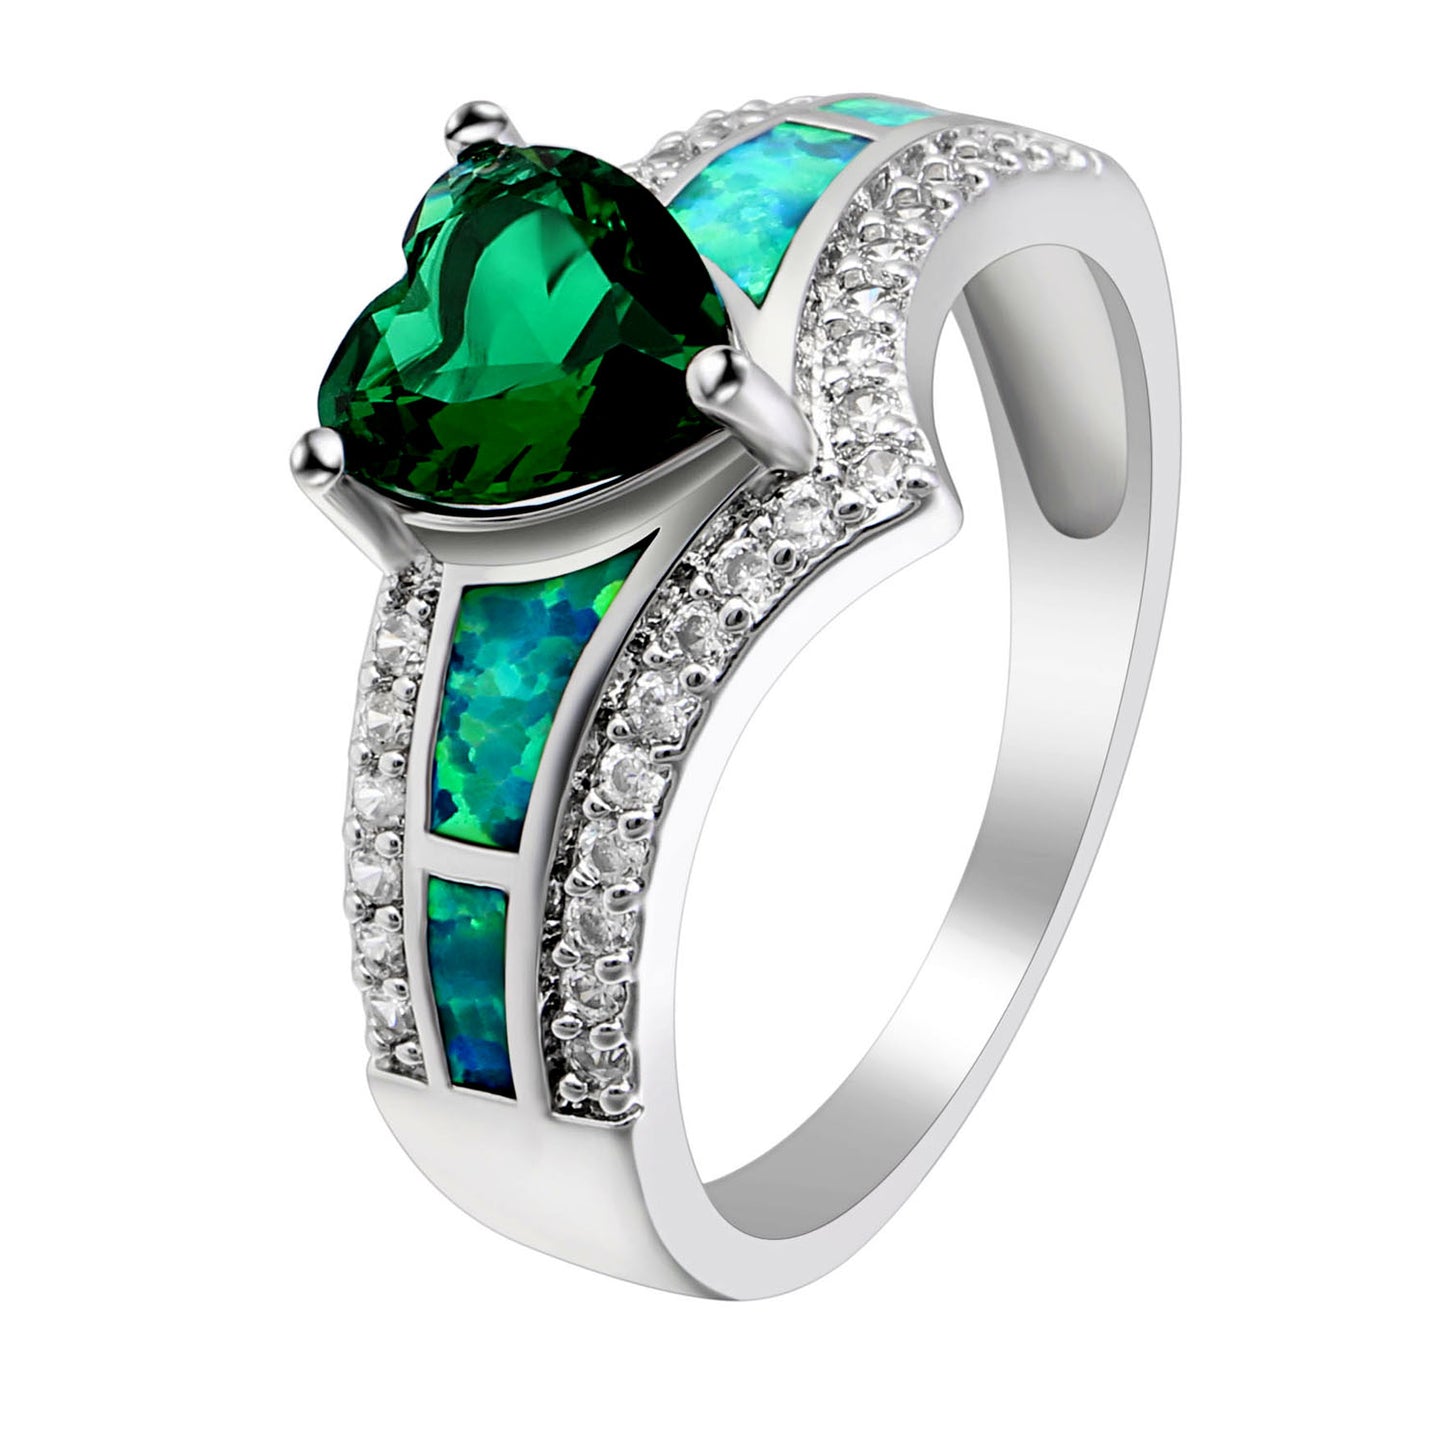 Majestic Heart Cz Promise Ring Created Fire Opal Girl Women Ginger Lyne Collection - Green,7